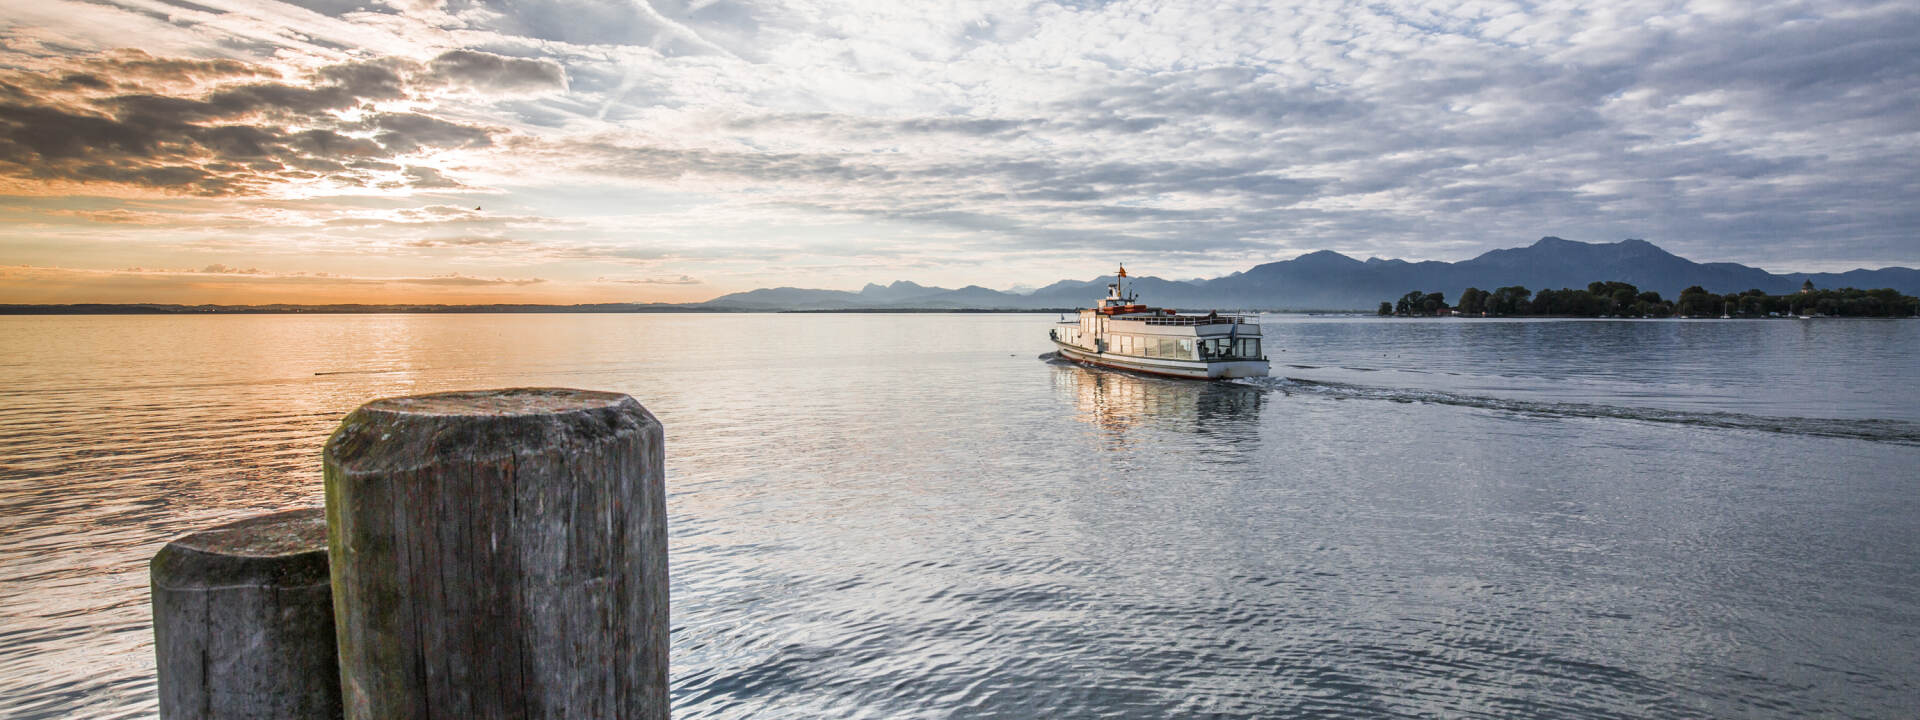 Lake Chiemsee with steamboat ©Chiemsee-Alpenland Tourismus